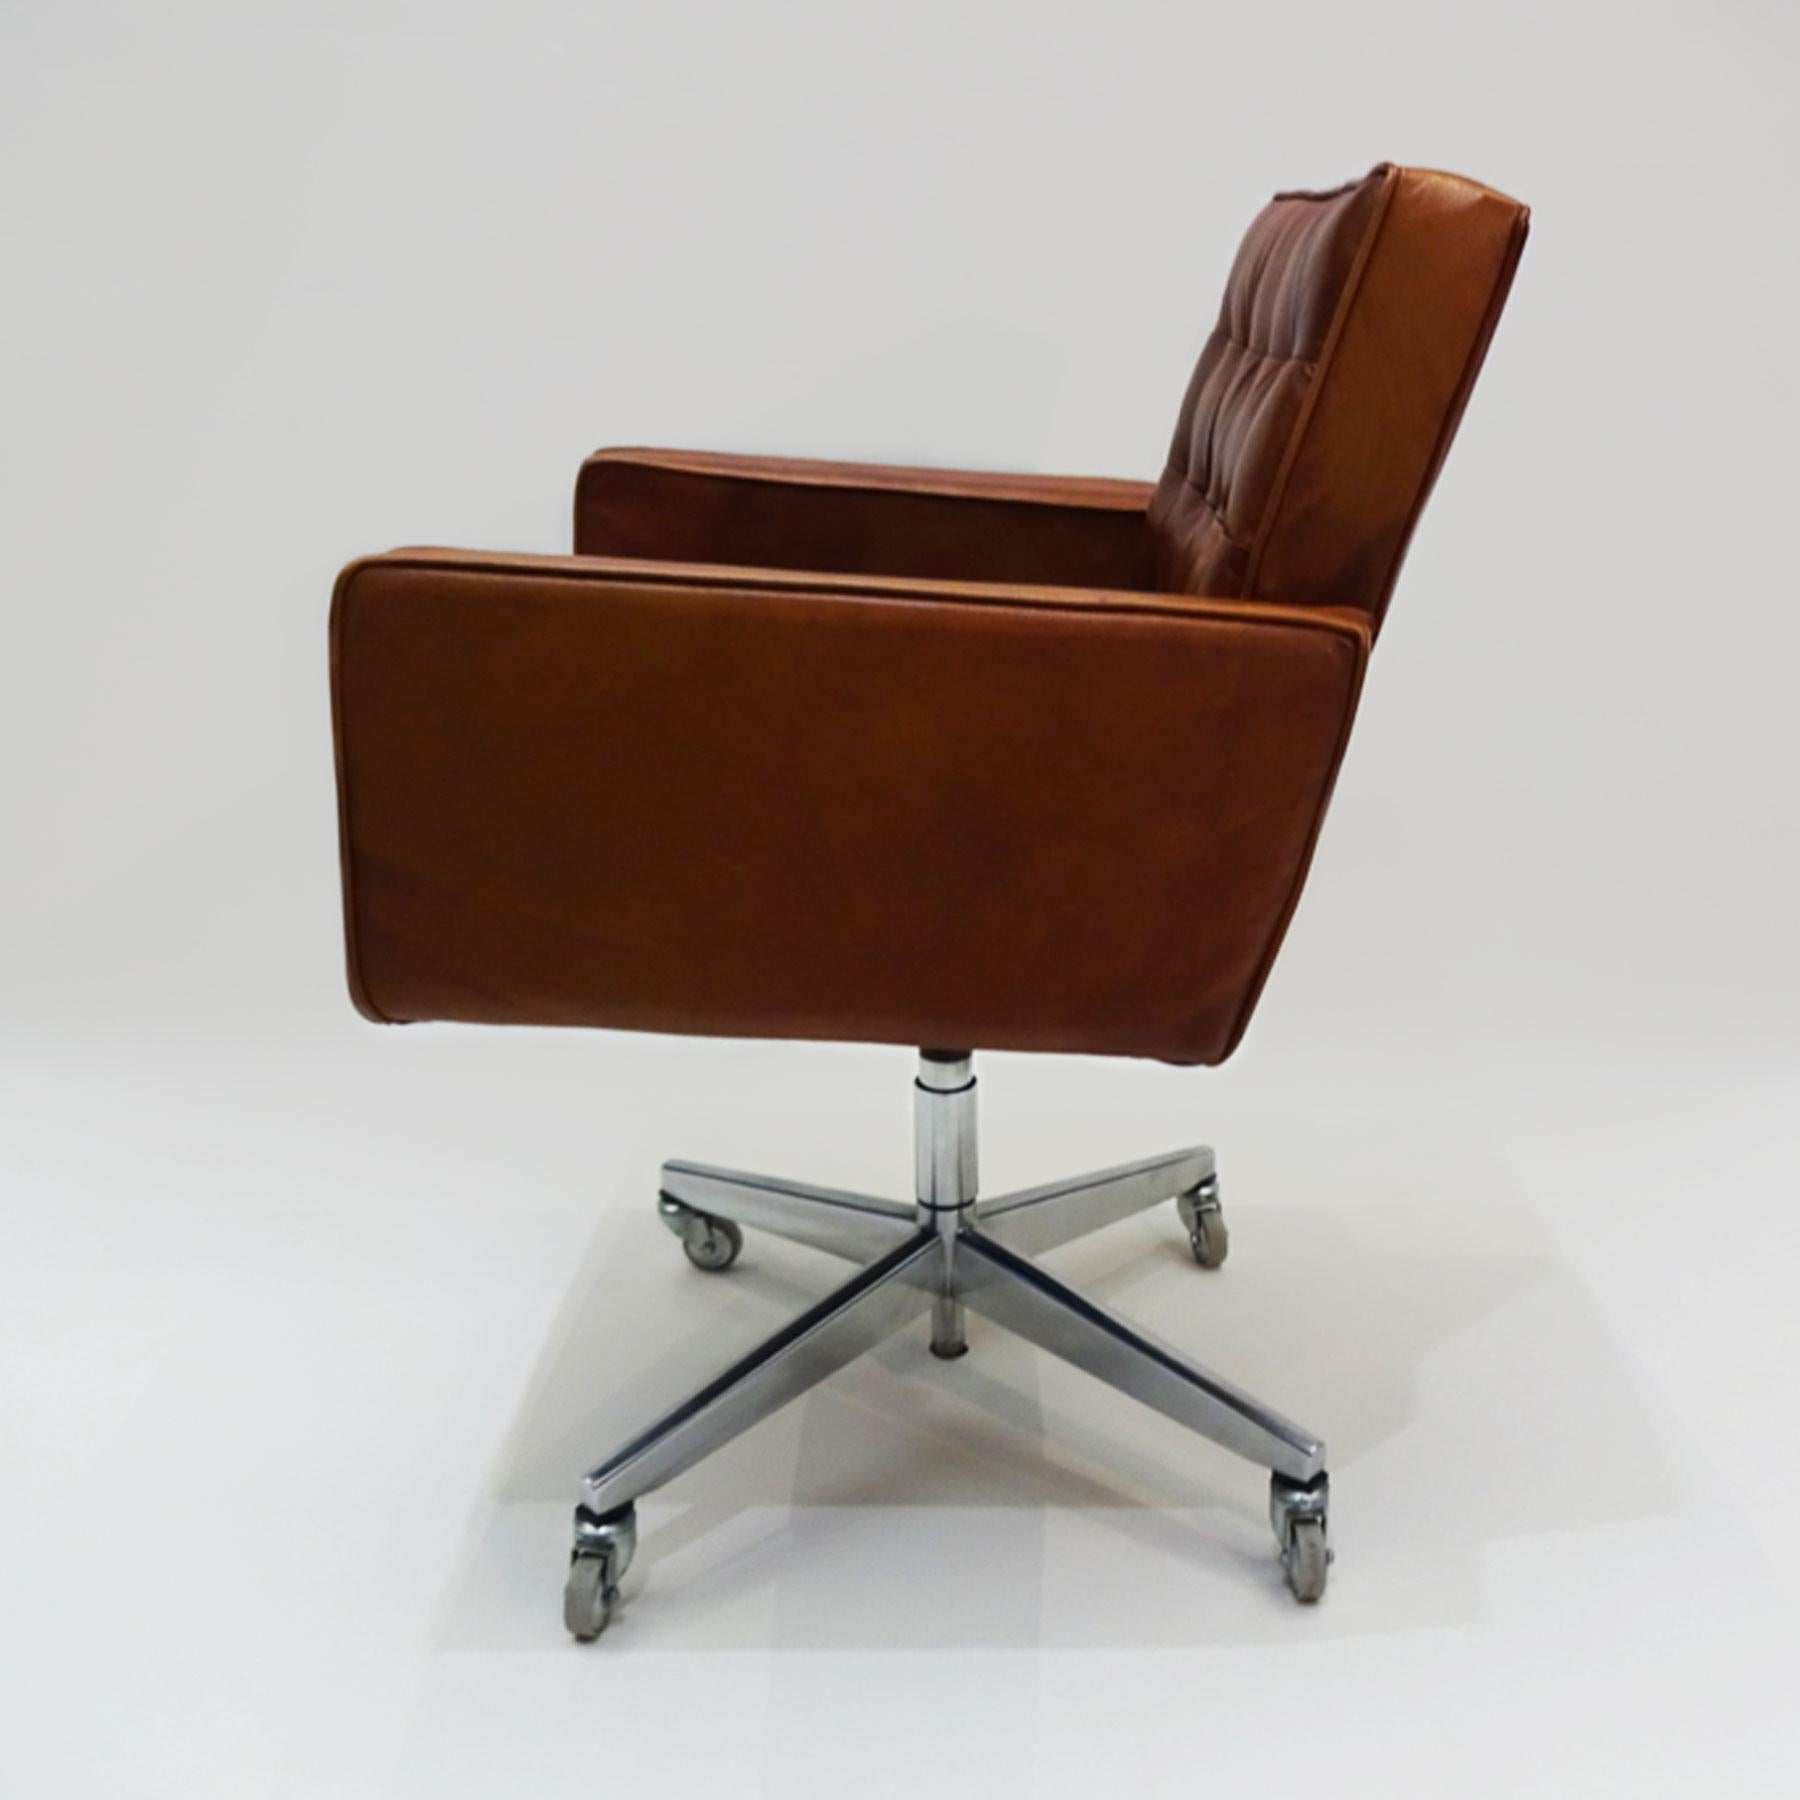 American Midcentury Knoll Cognac Leather and Aluminum Task Chair by Vincent Cafiero